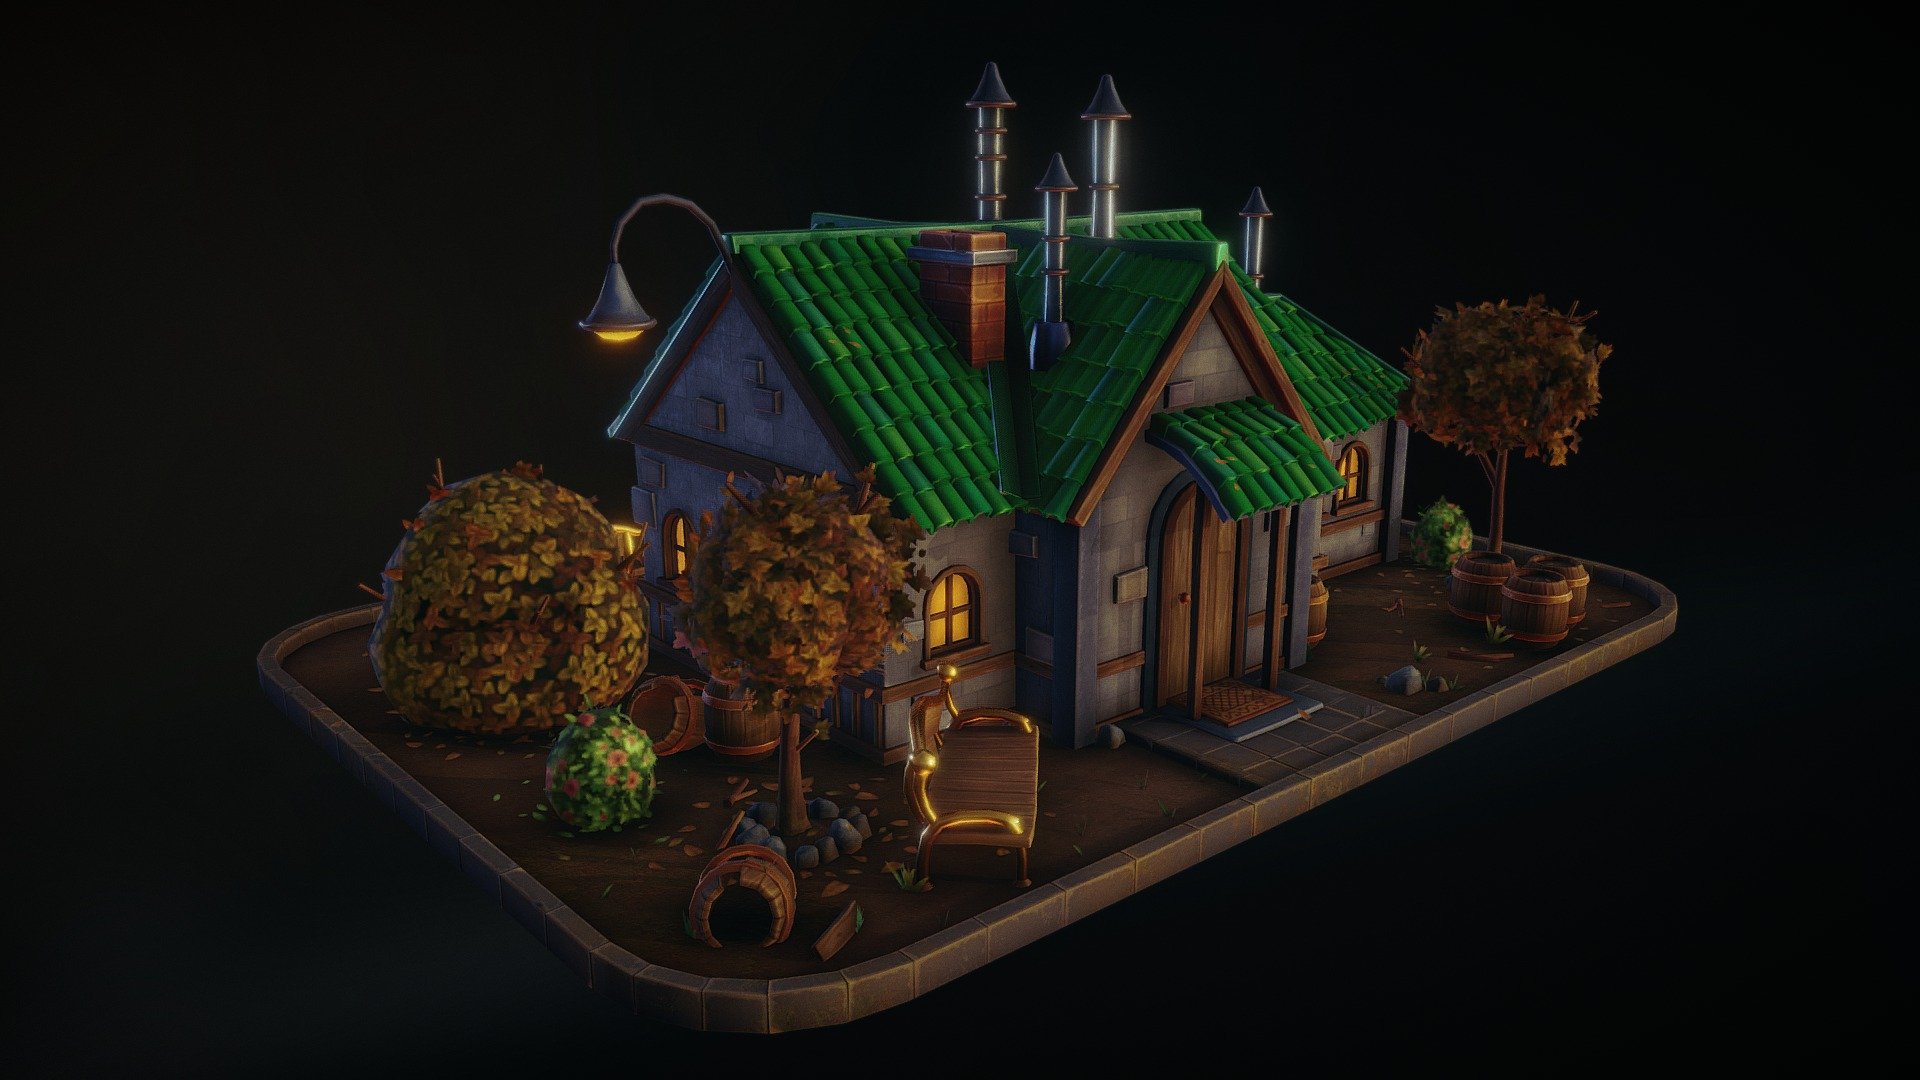 The second 3D model &ldquo;Fisherman's House